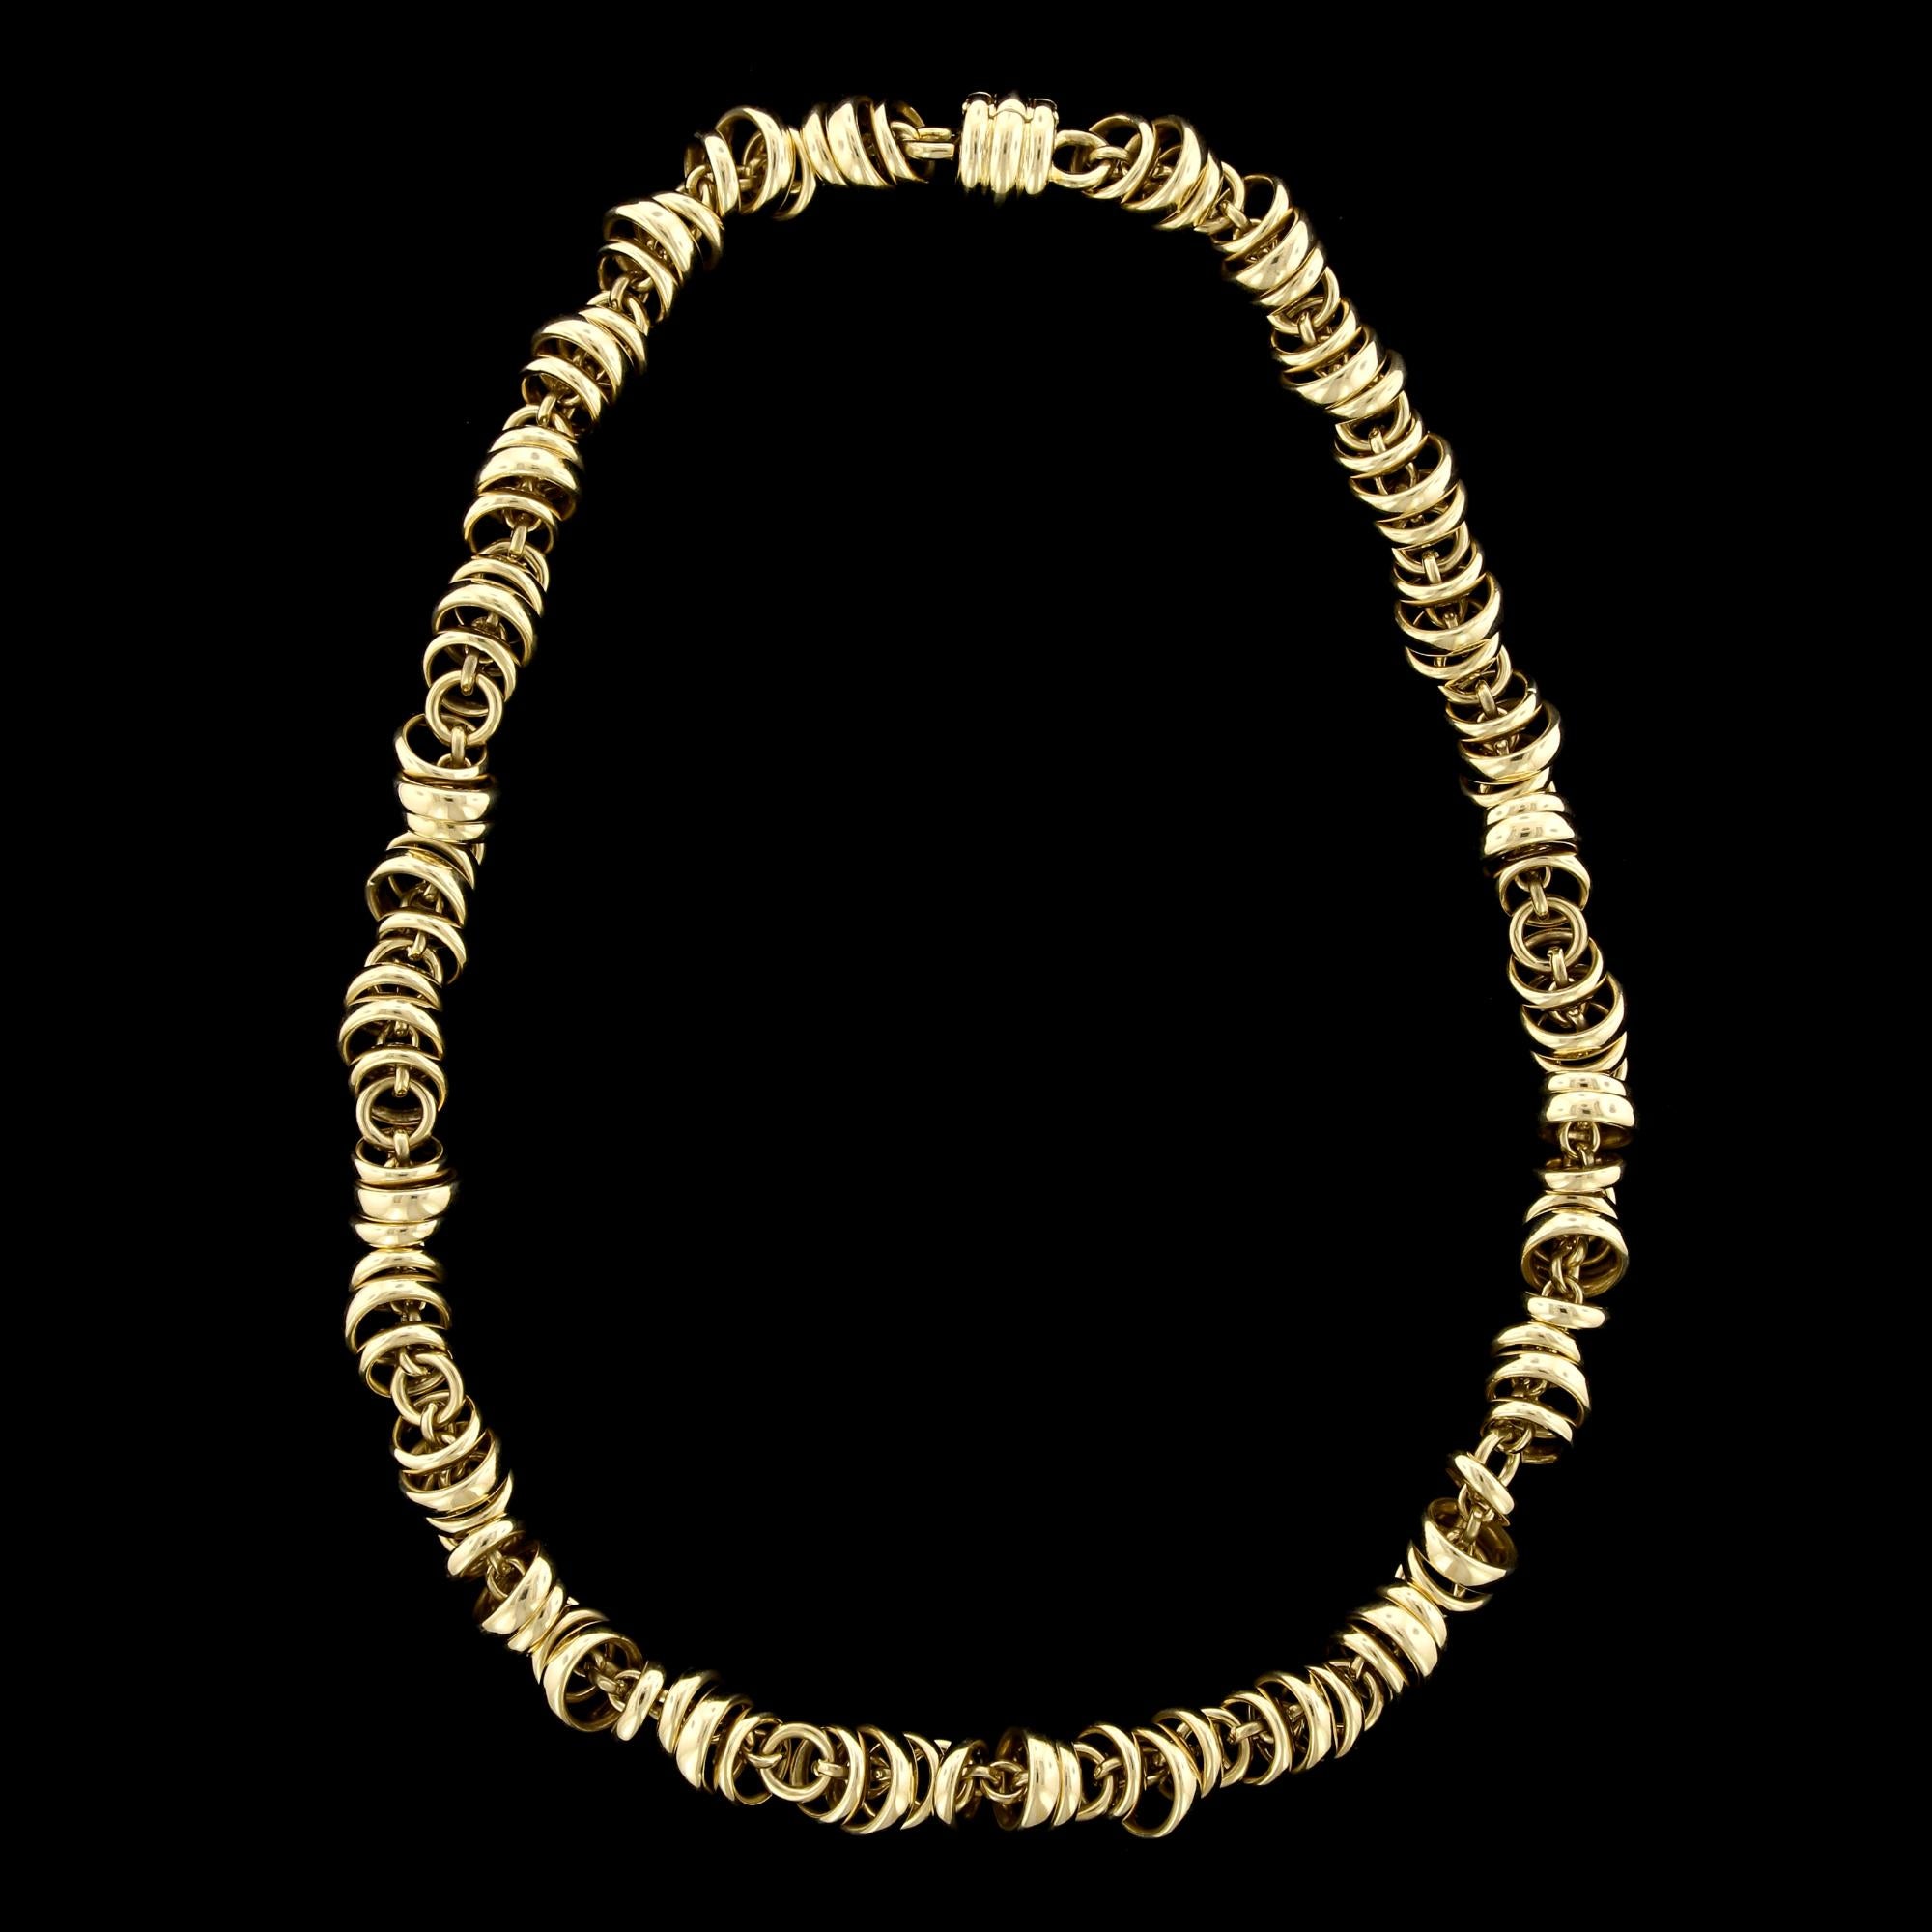 Pomellato 18K Yellow Gold Necklace, Italy. The necklace is designed with moving circular links, length 17